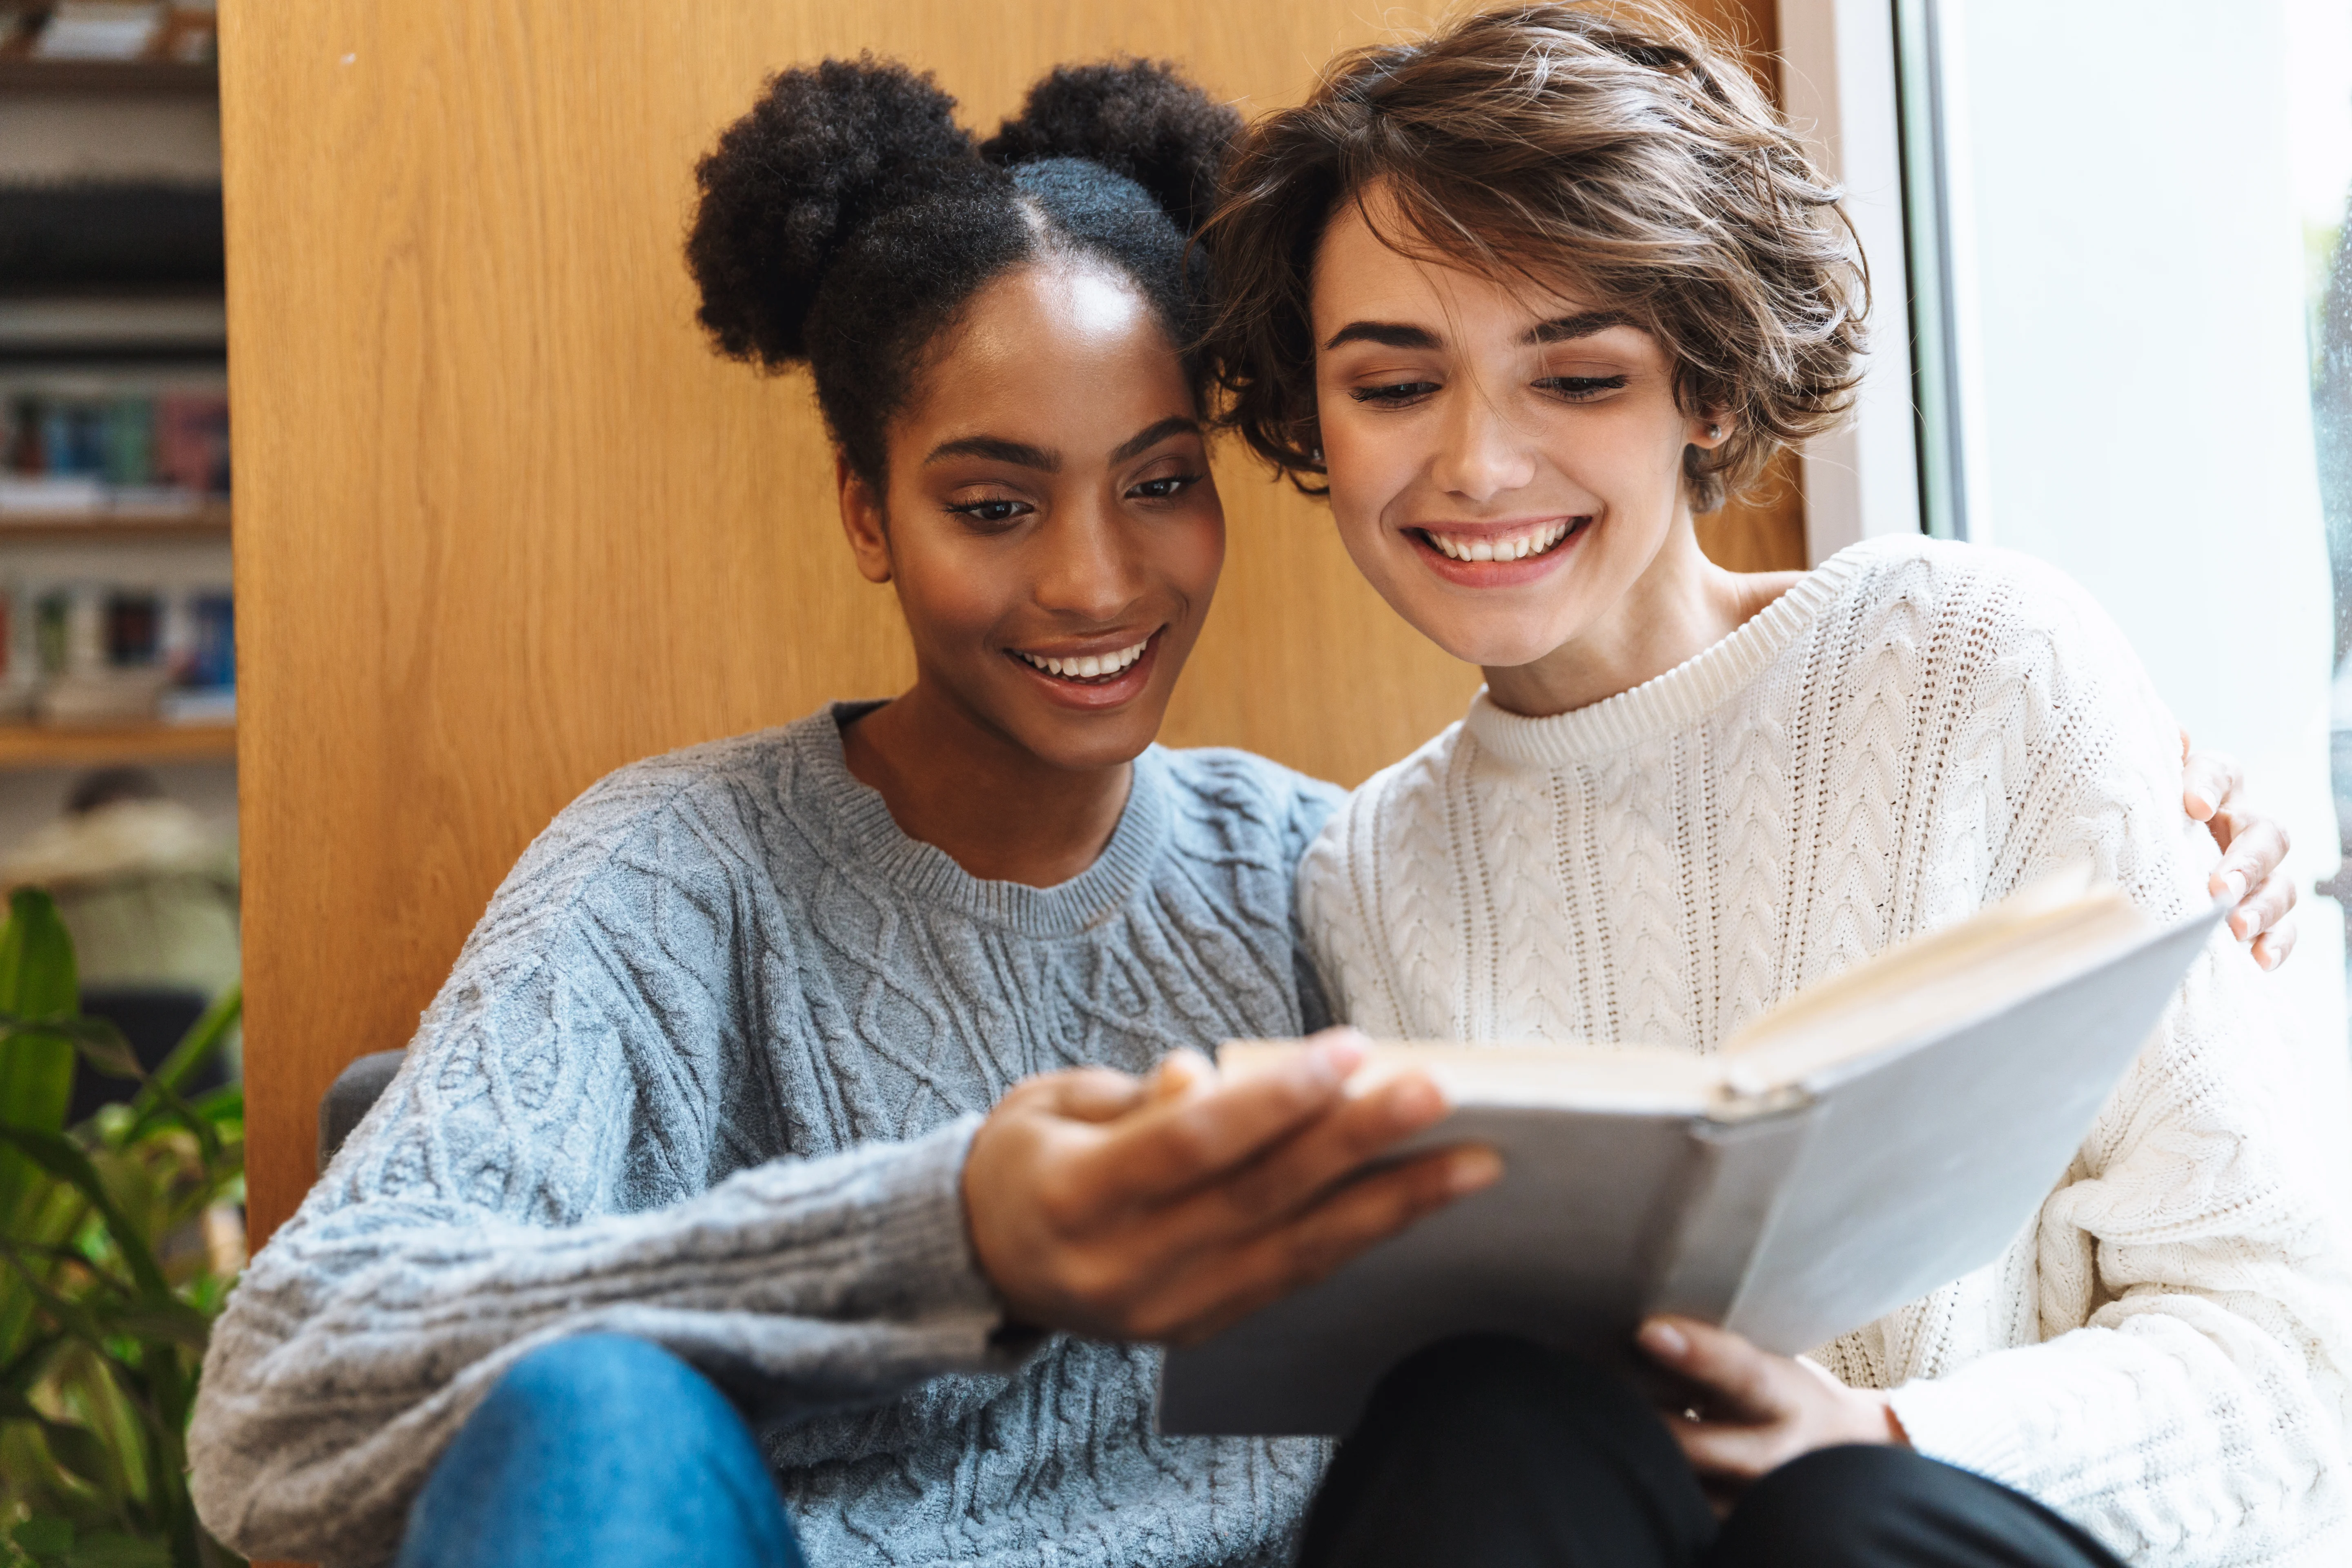 Two girls smiling while reading a book